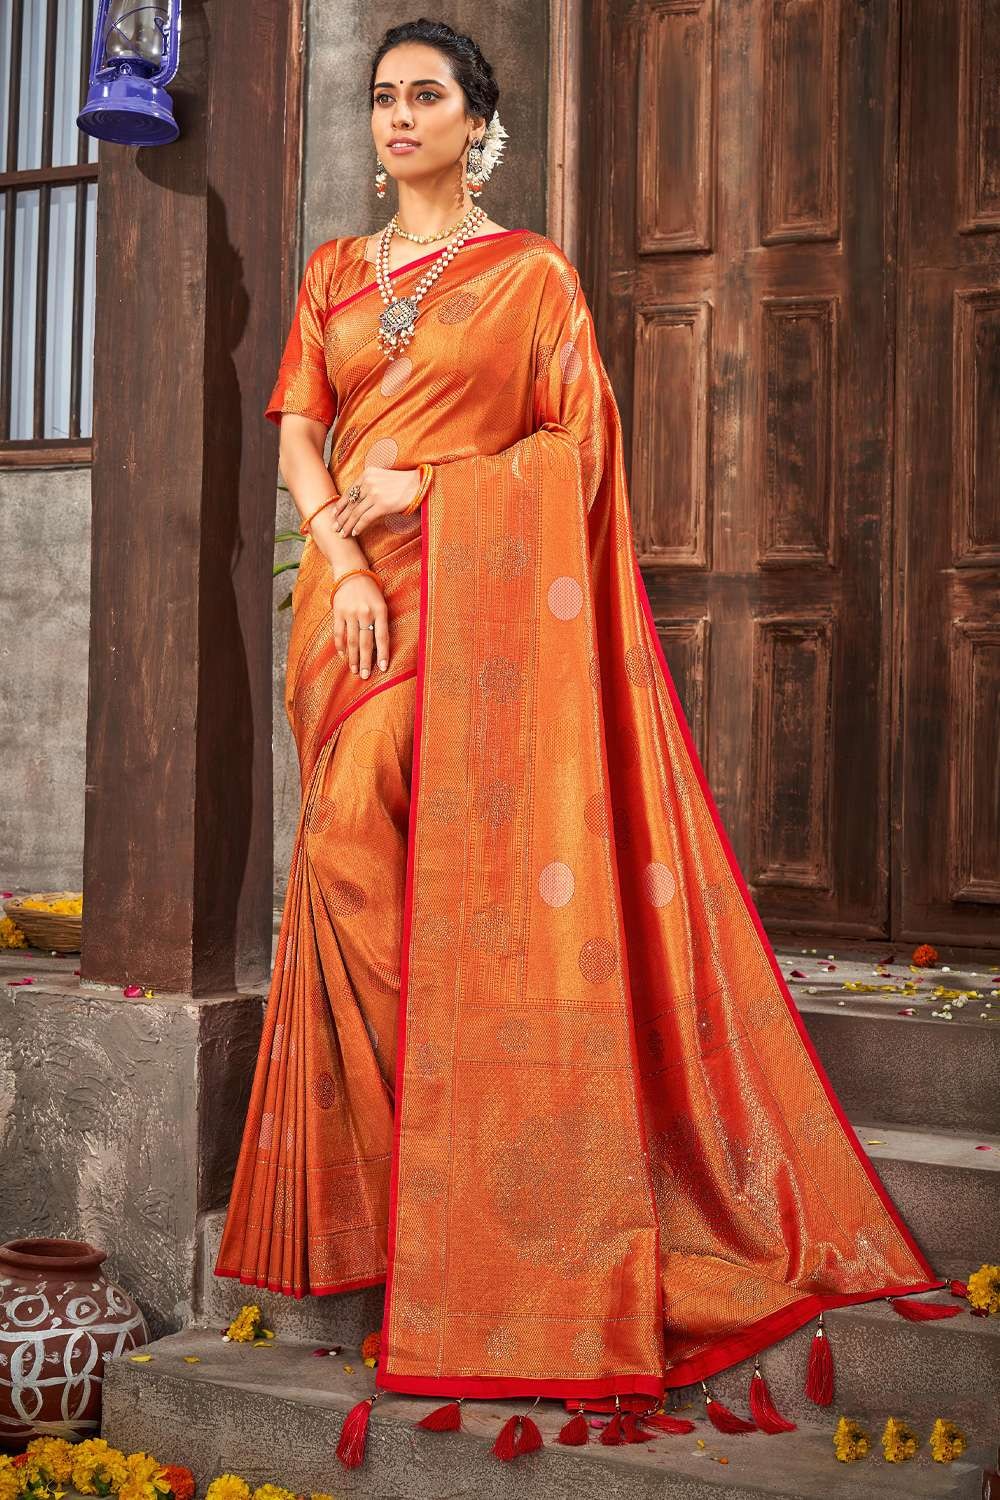 Classiest Kamarbandh Designs To Take Bridal Look Inspo From! | Bridal sarees  south indian, South indian bride saree, South indian bridal jewellery